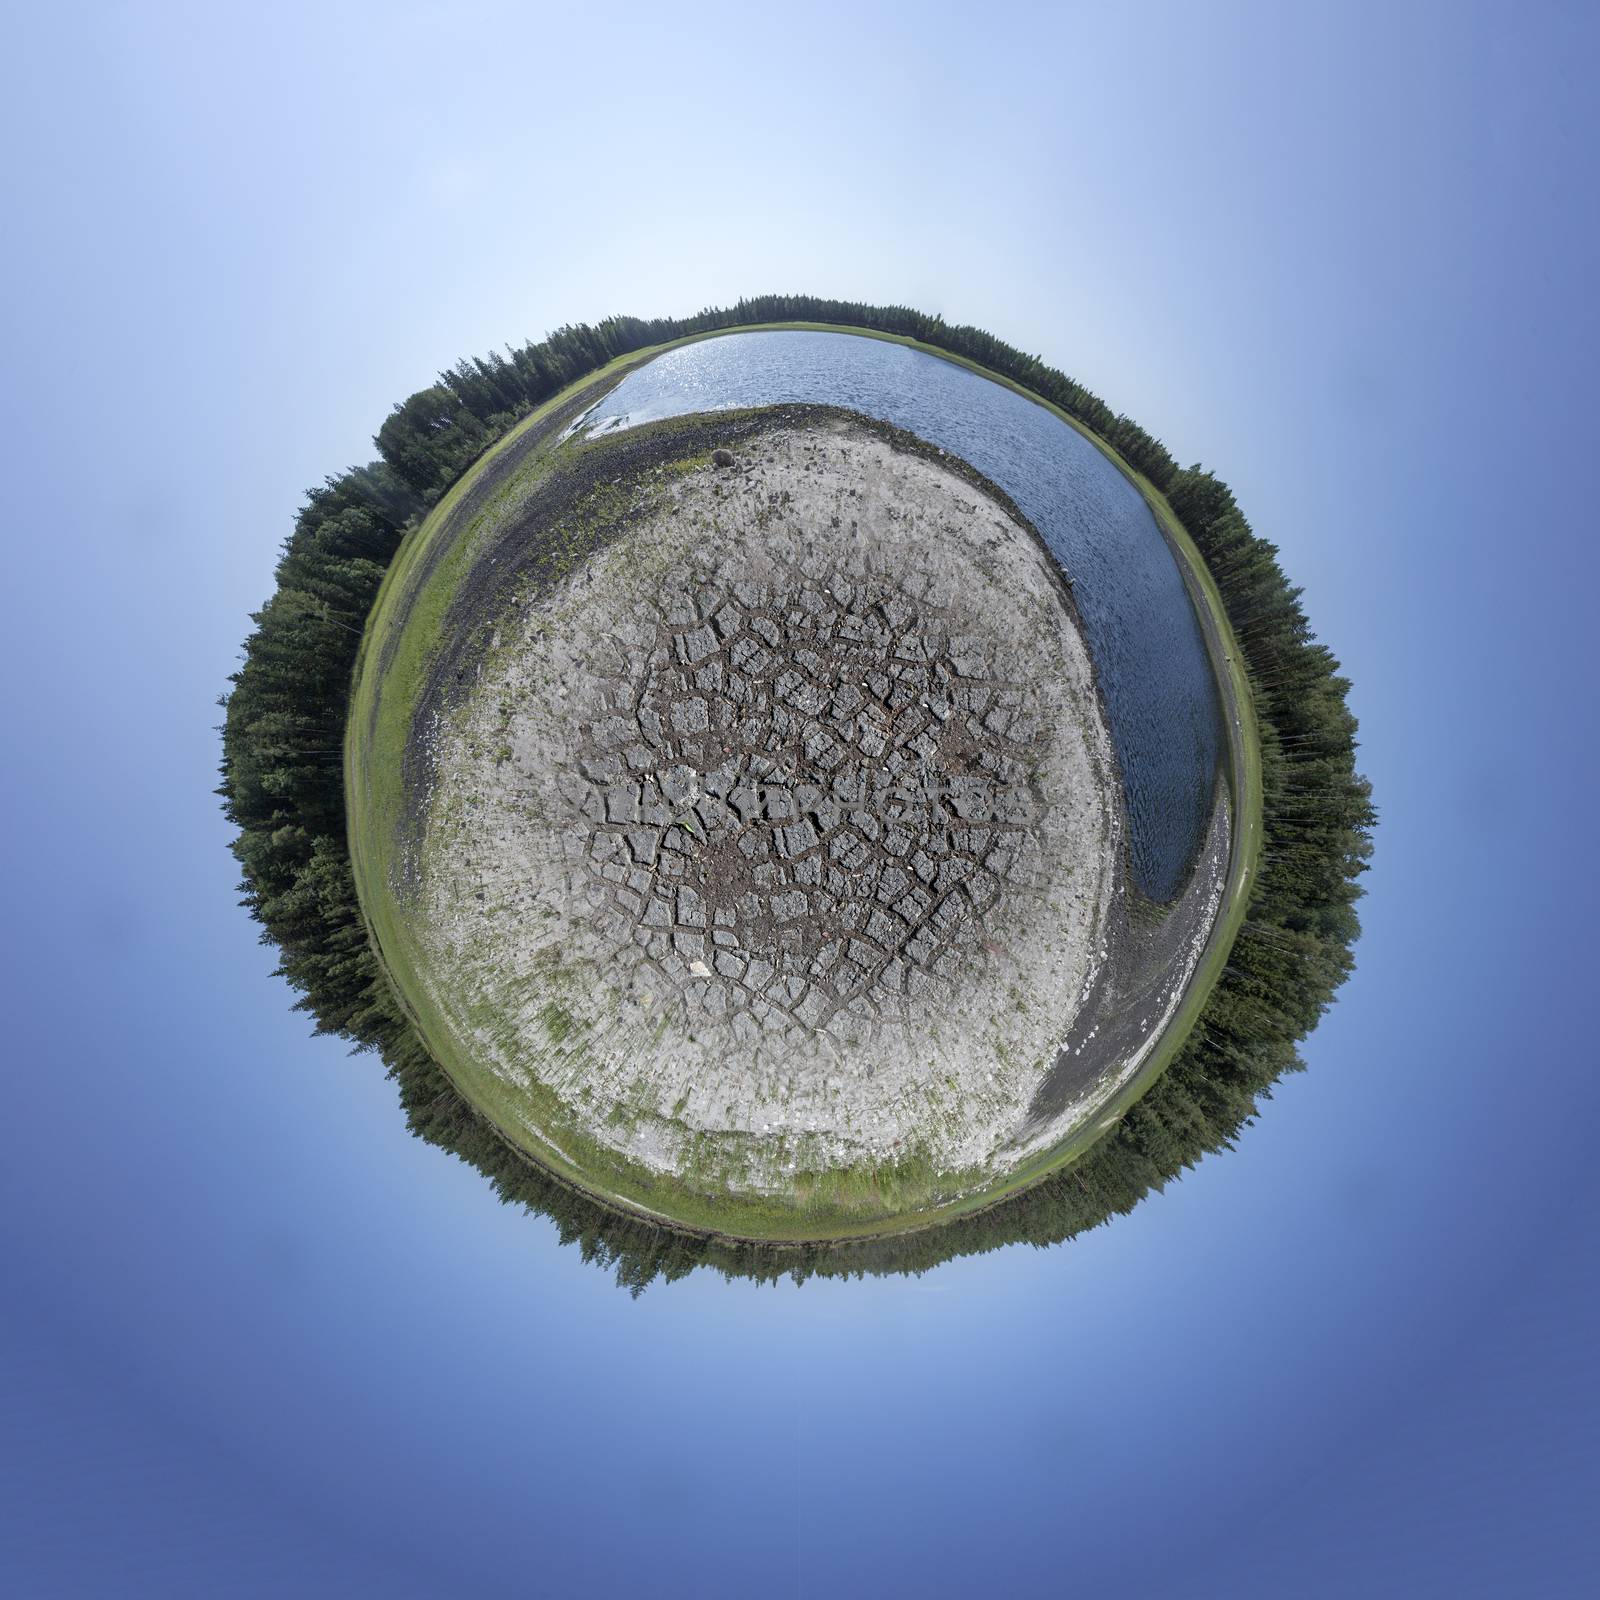 Dried Out Lake Tiny Planet by ints